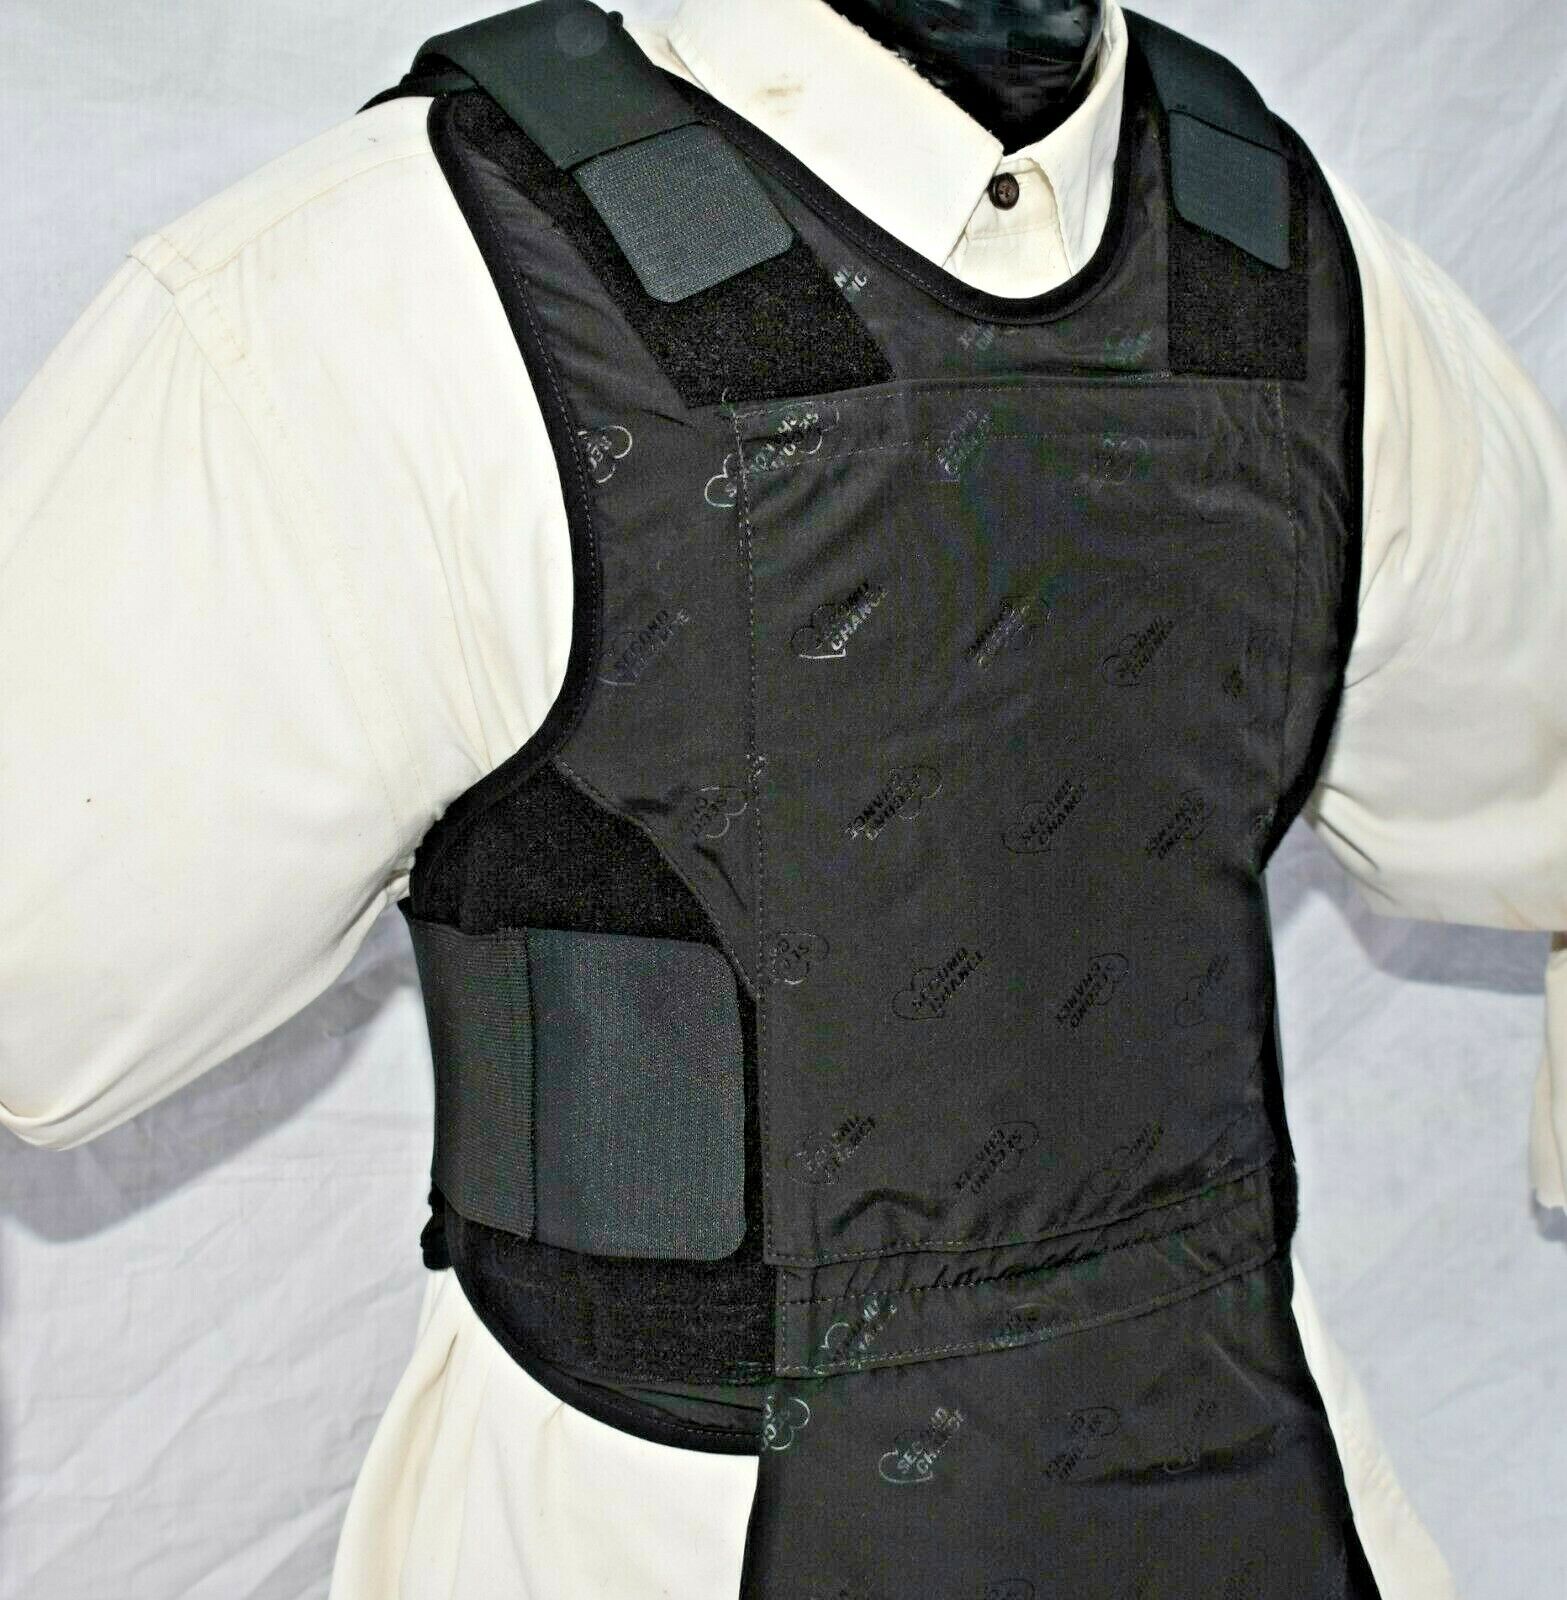 New Small Second Chance IIIA Concealable Body Armor Carrier Bullet Proof Vest 